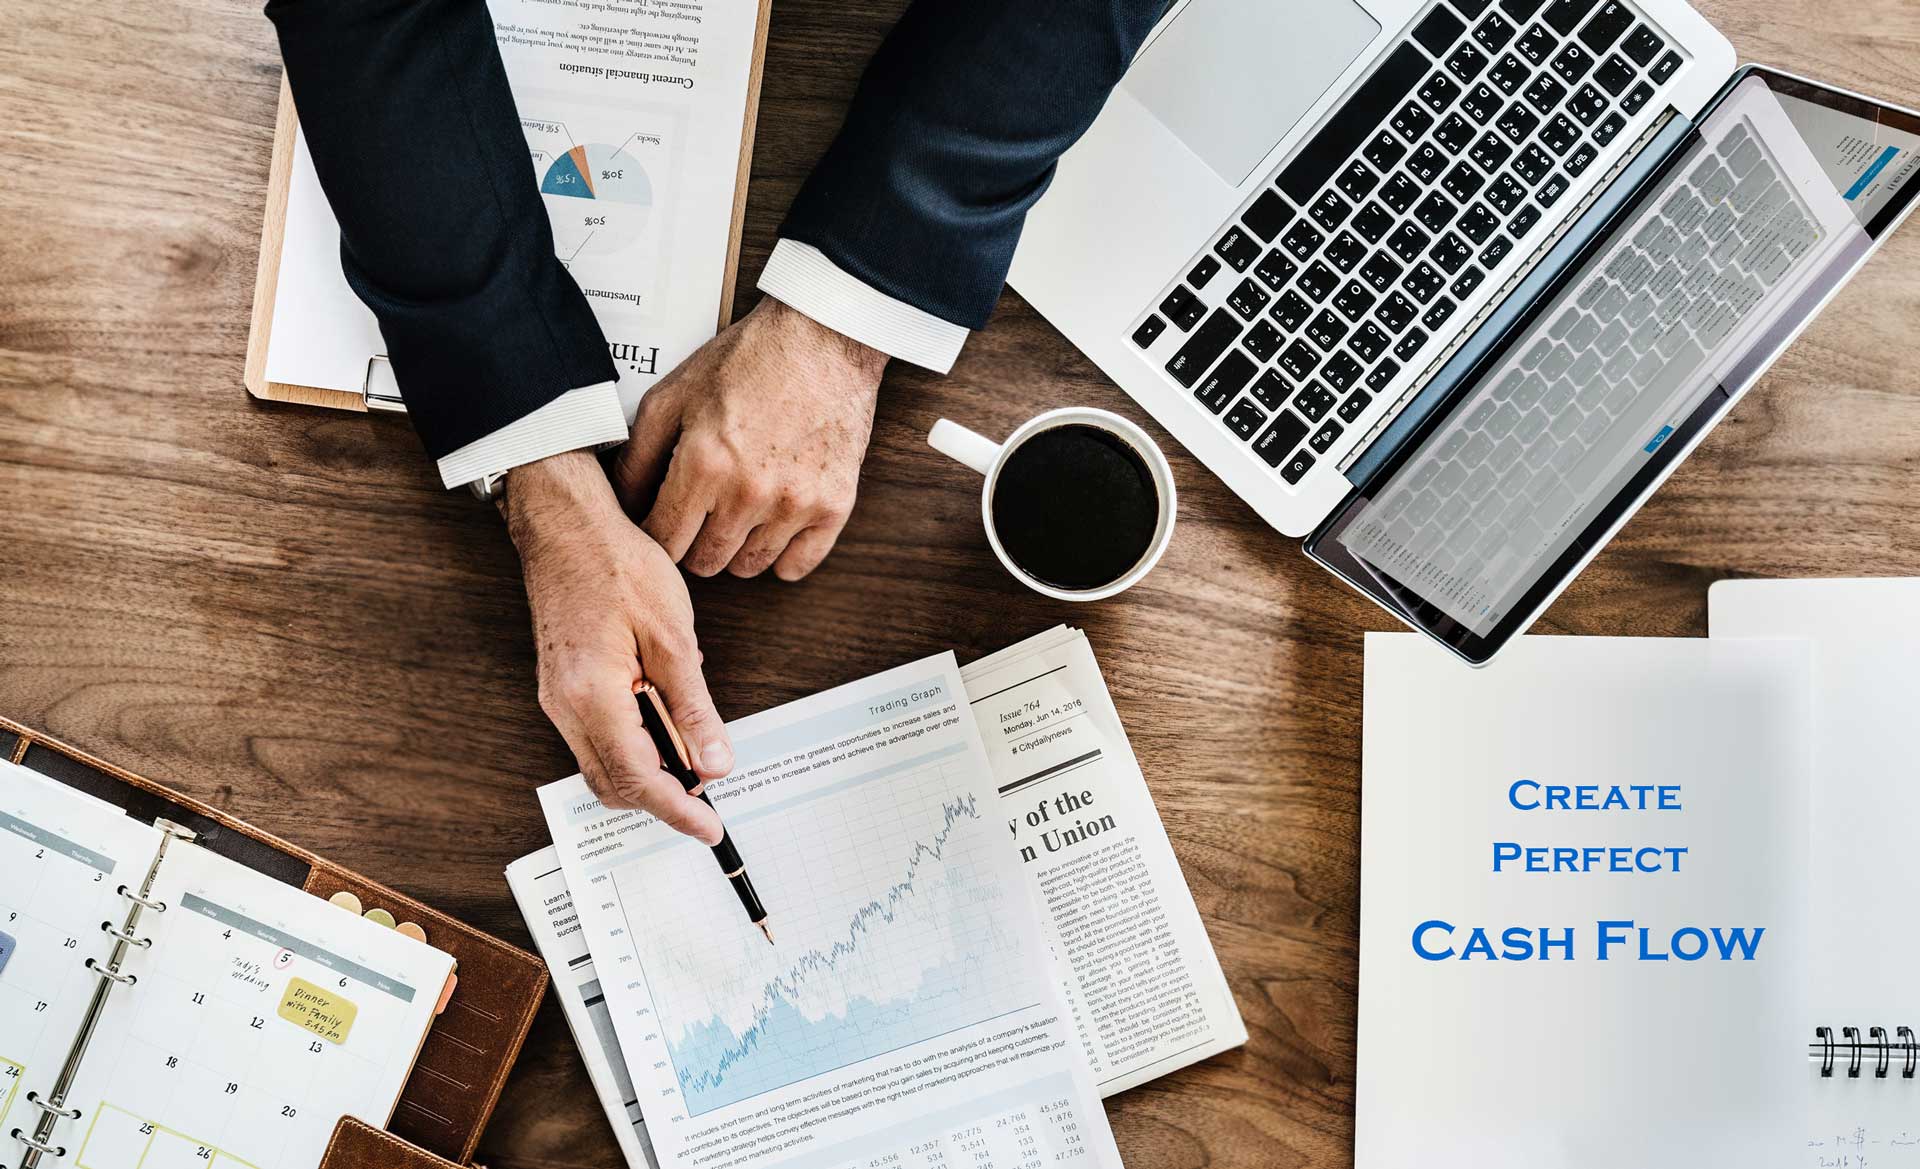 How to Create the Perfect Cash Flow for Your Business?